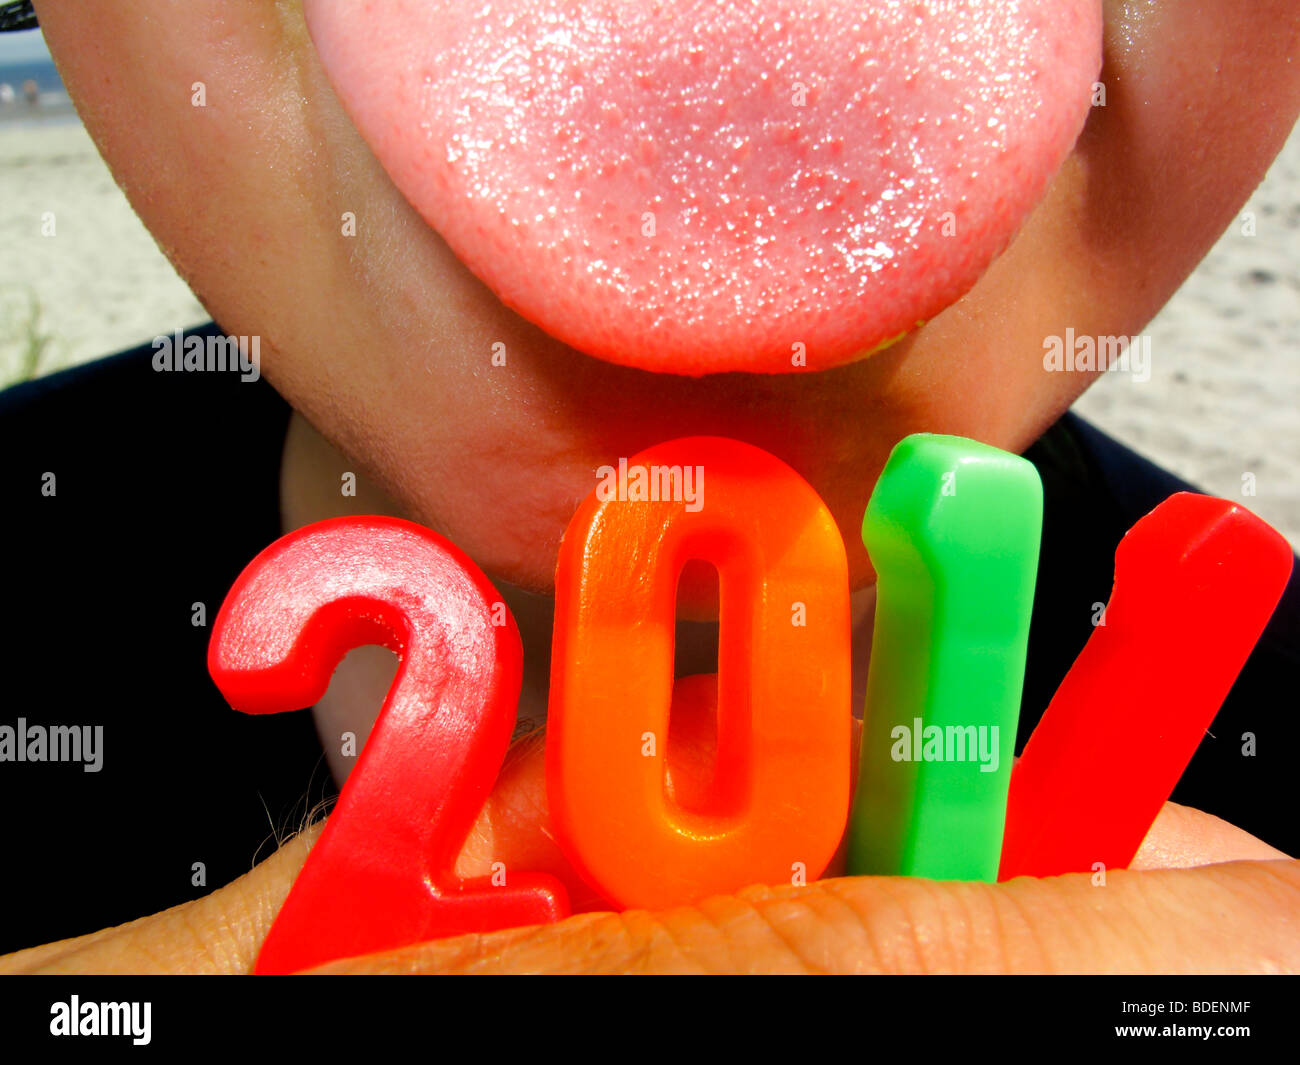 a child with his tongue out holding the year 2011 in numbers Stock Photo